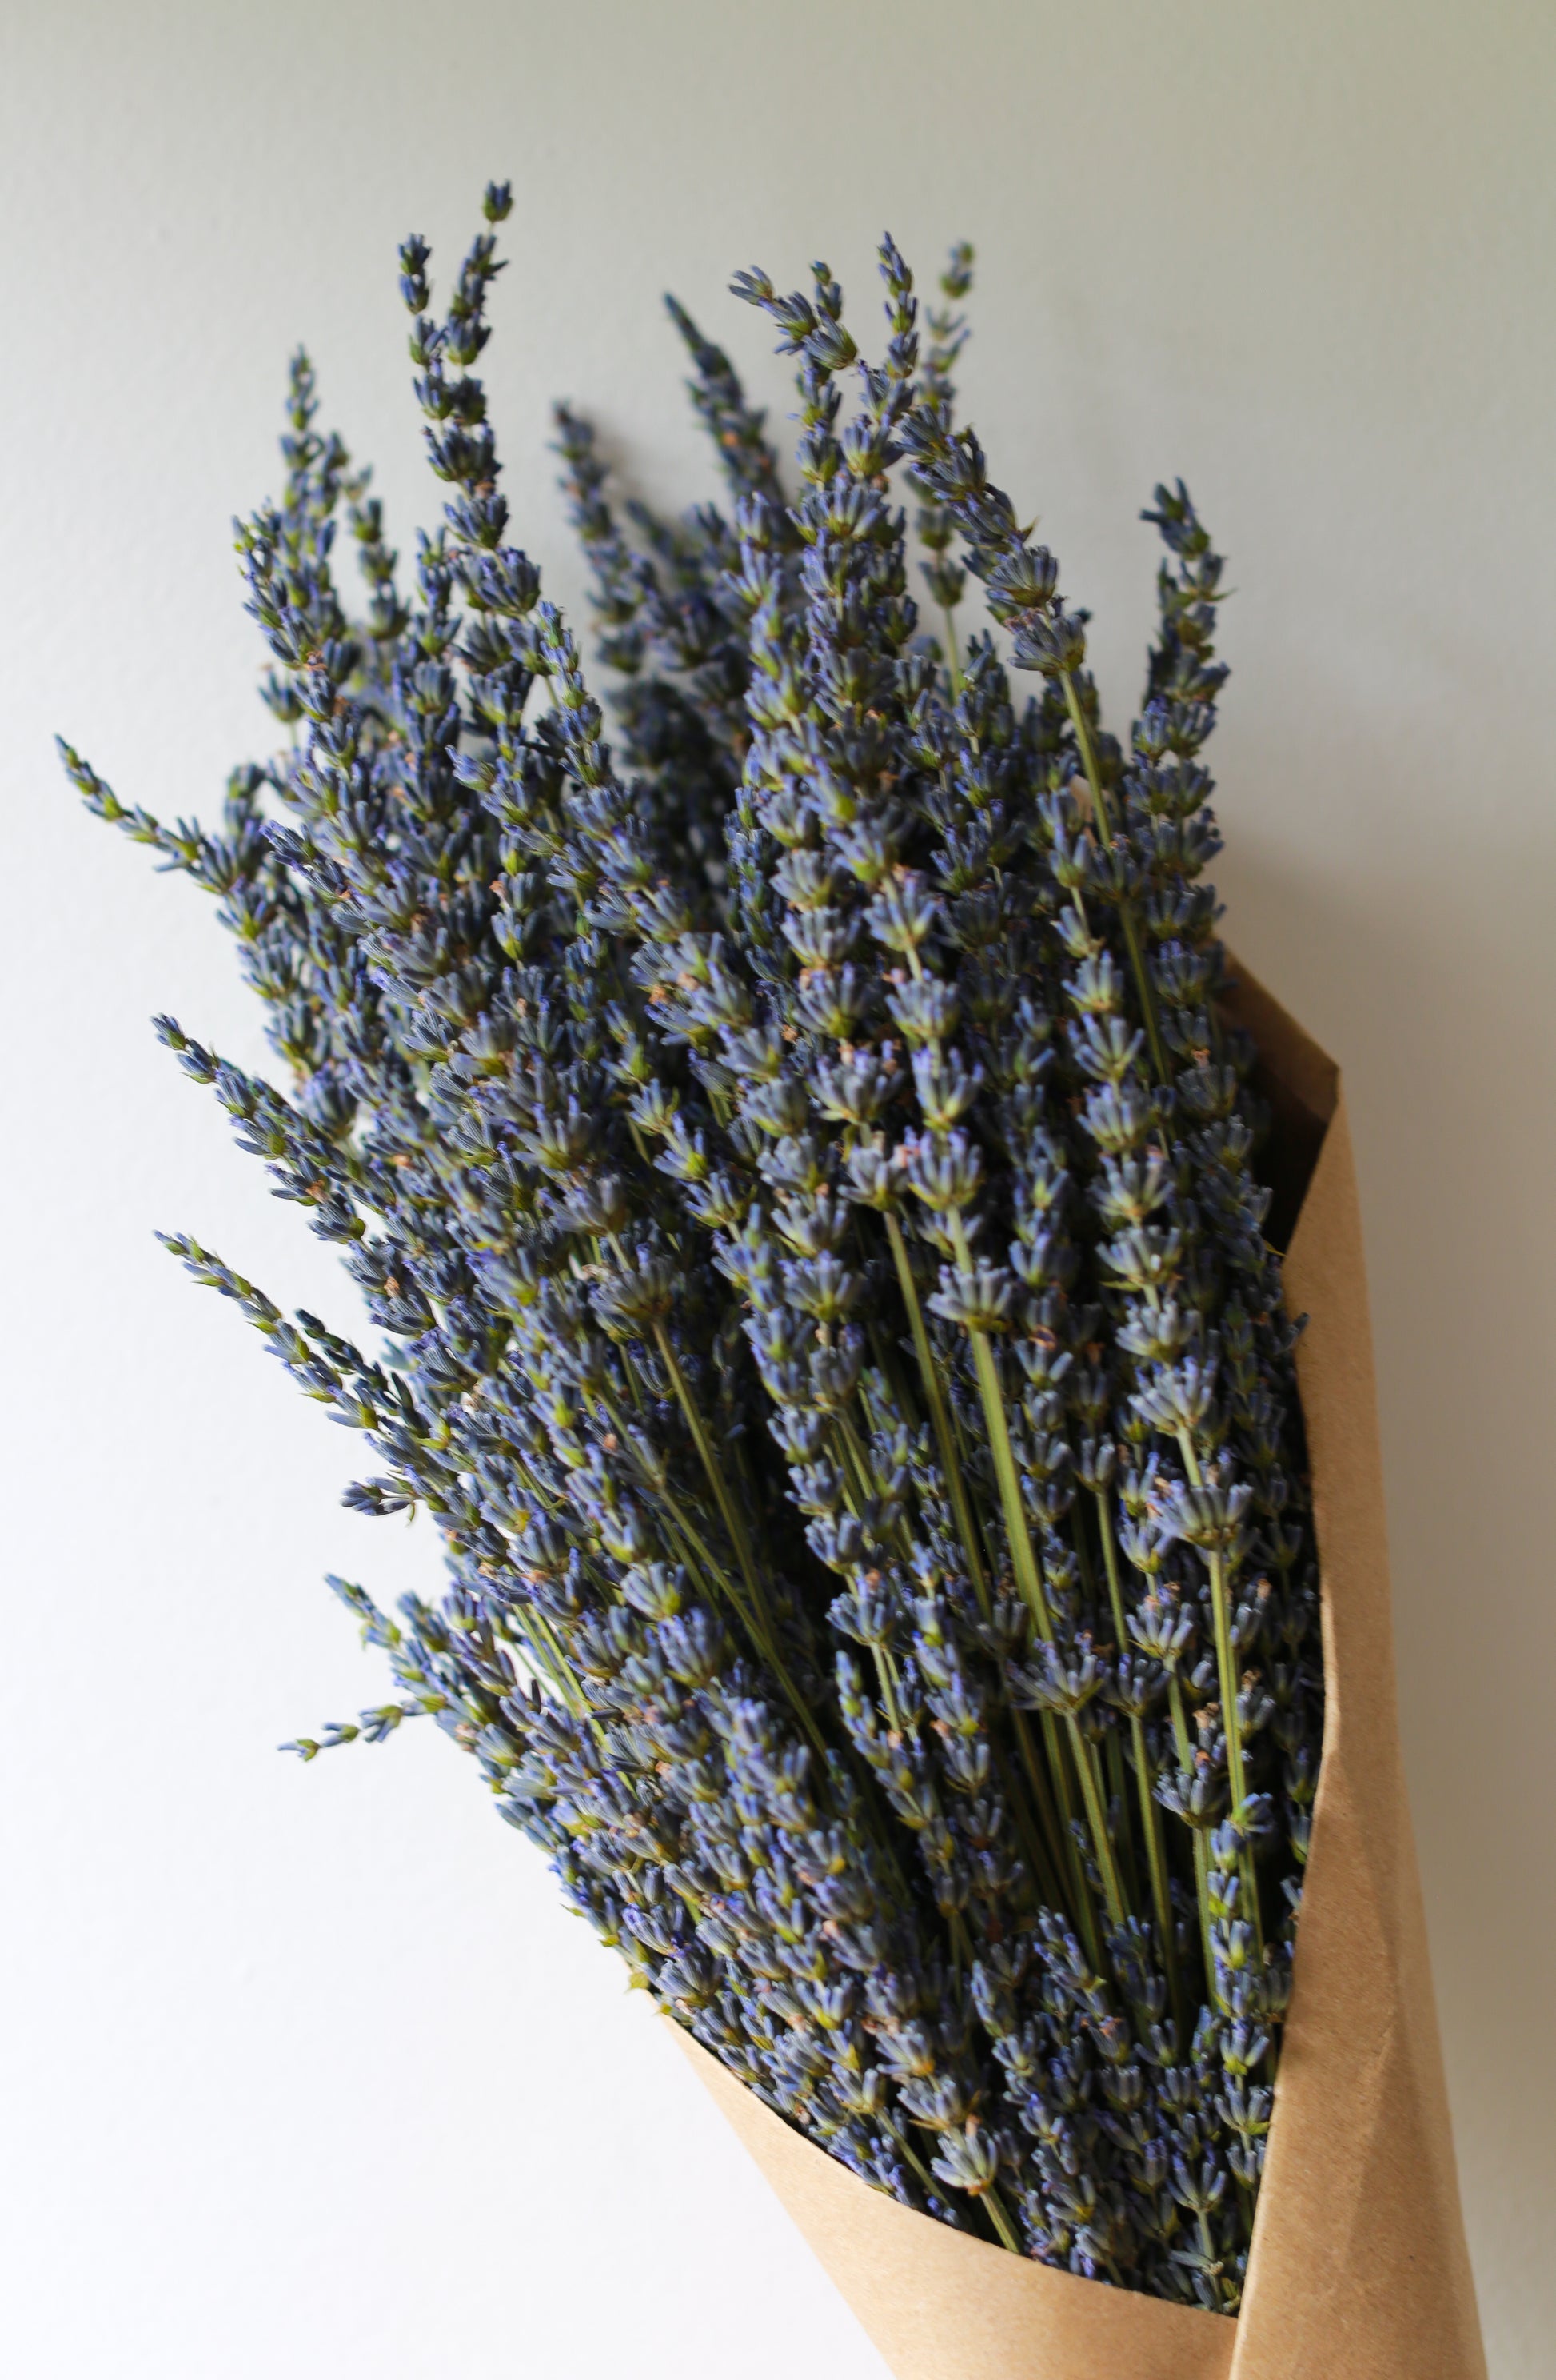 Dried Lavender bundle - Buy lavender direct from the farm!